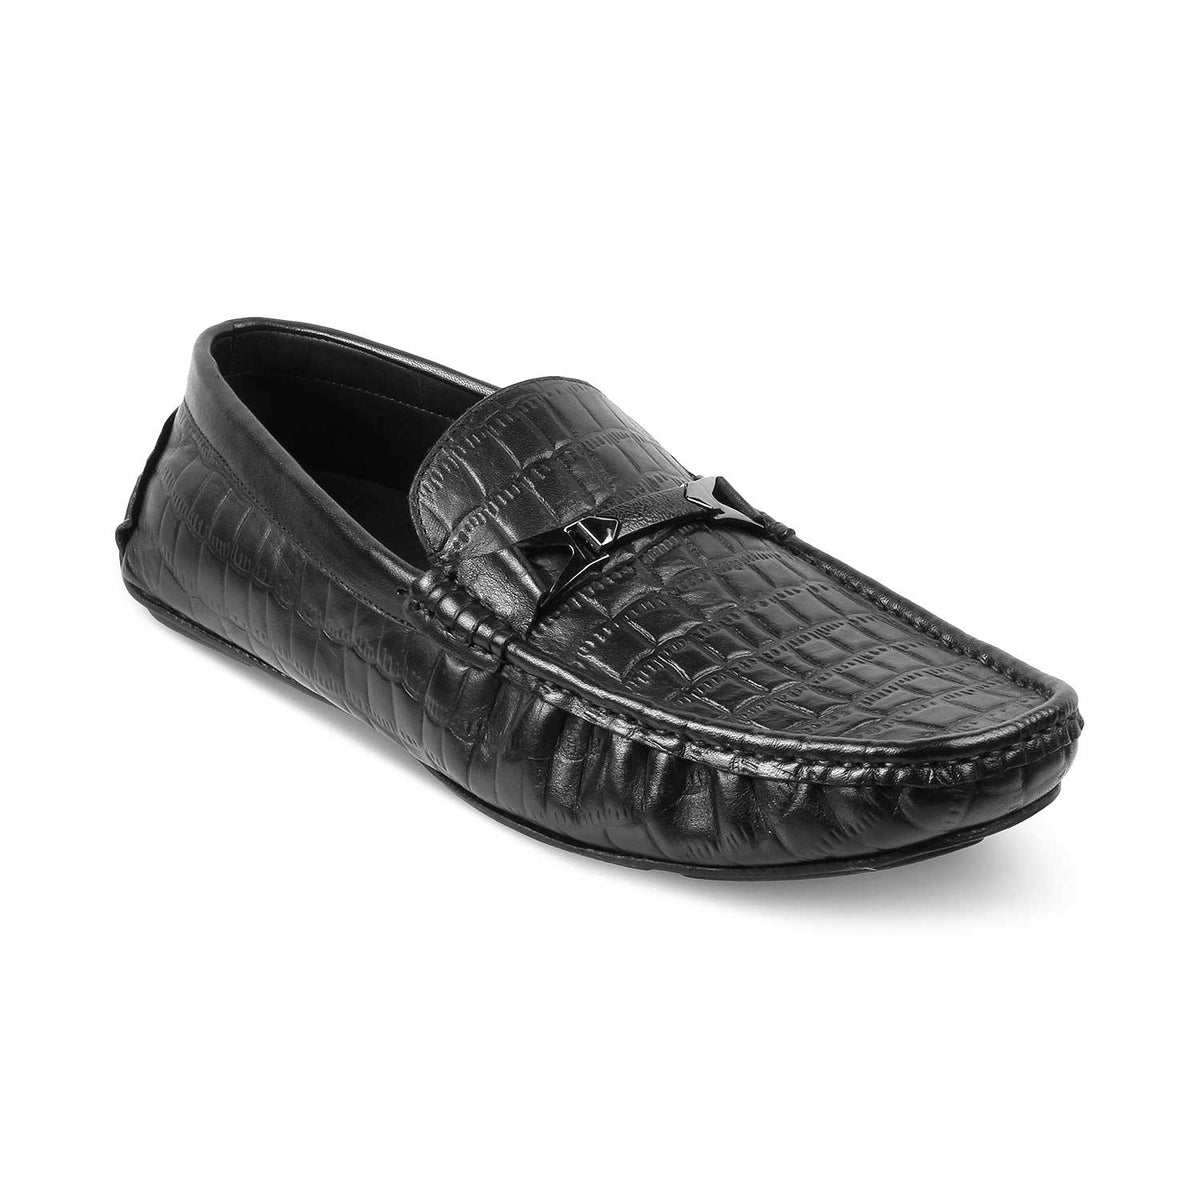 The Hummer Black Men's Leather Driving Loafers Tresmode - Tresmode